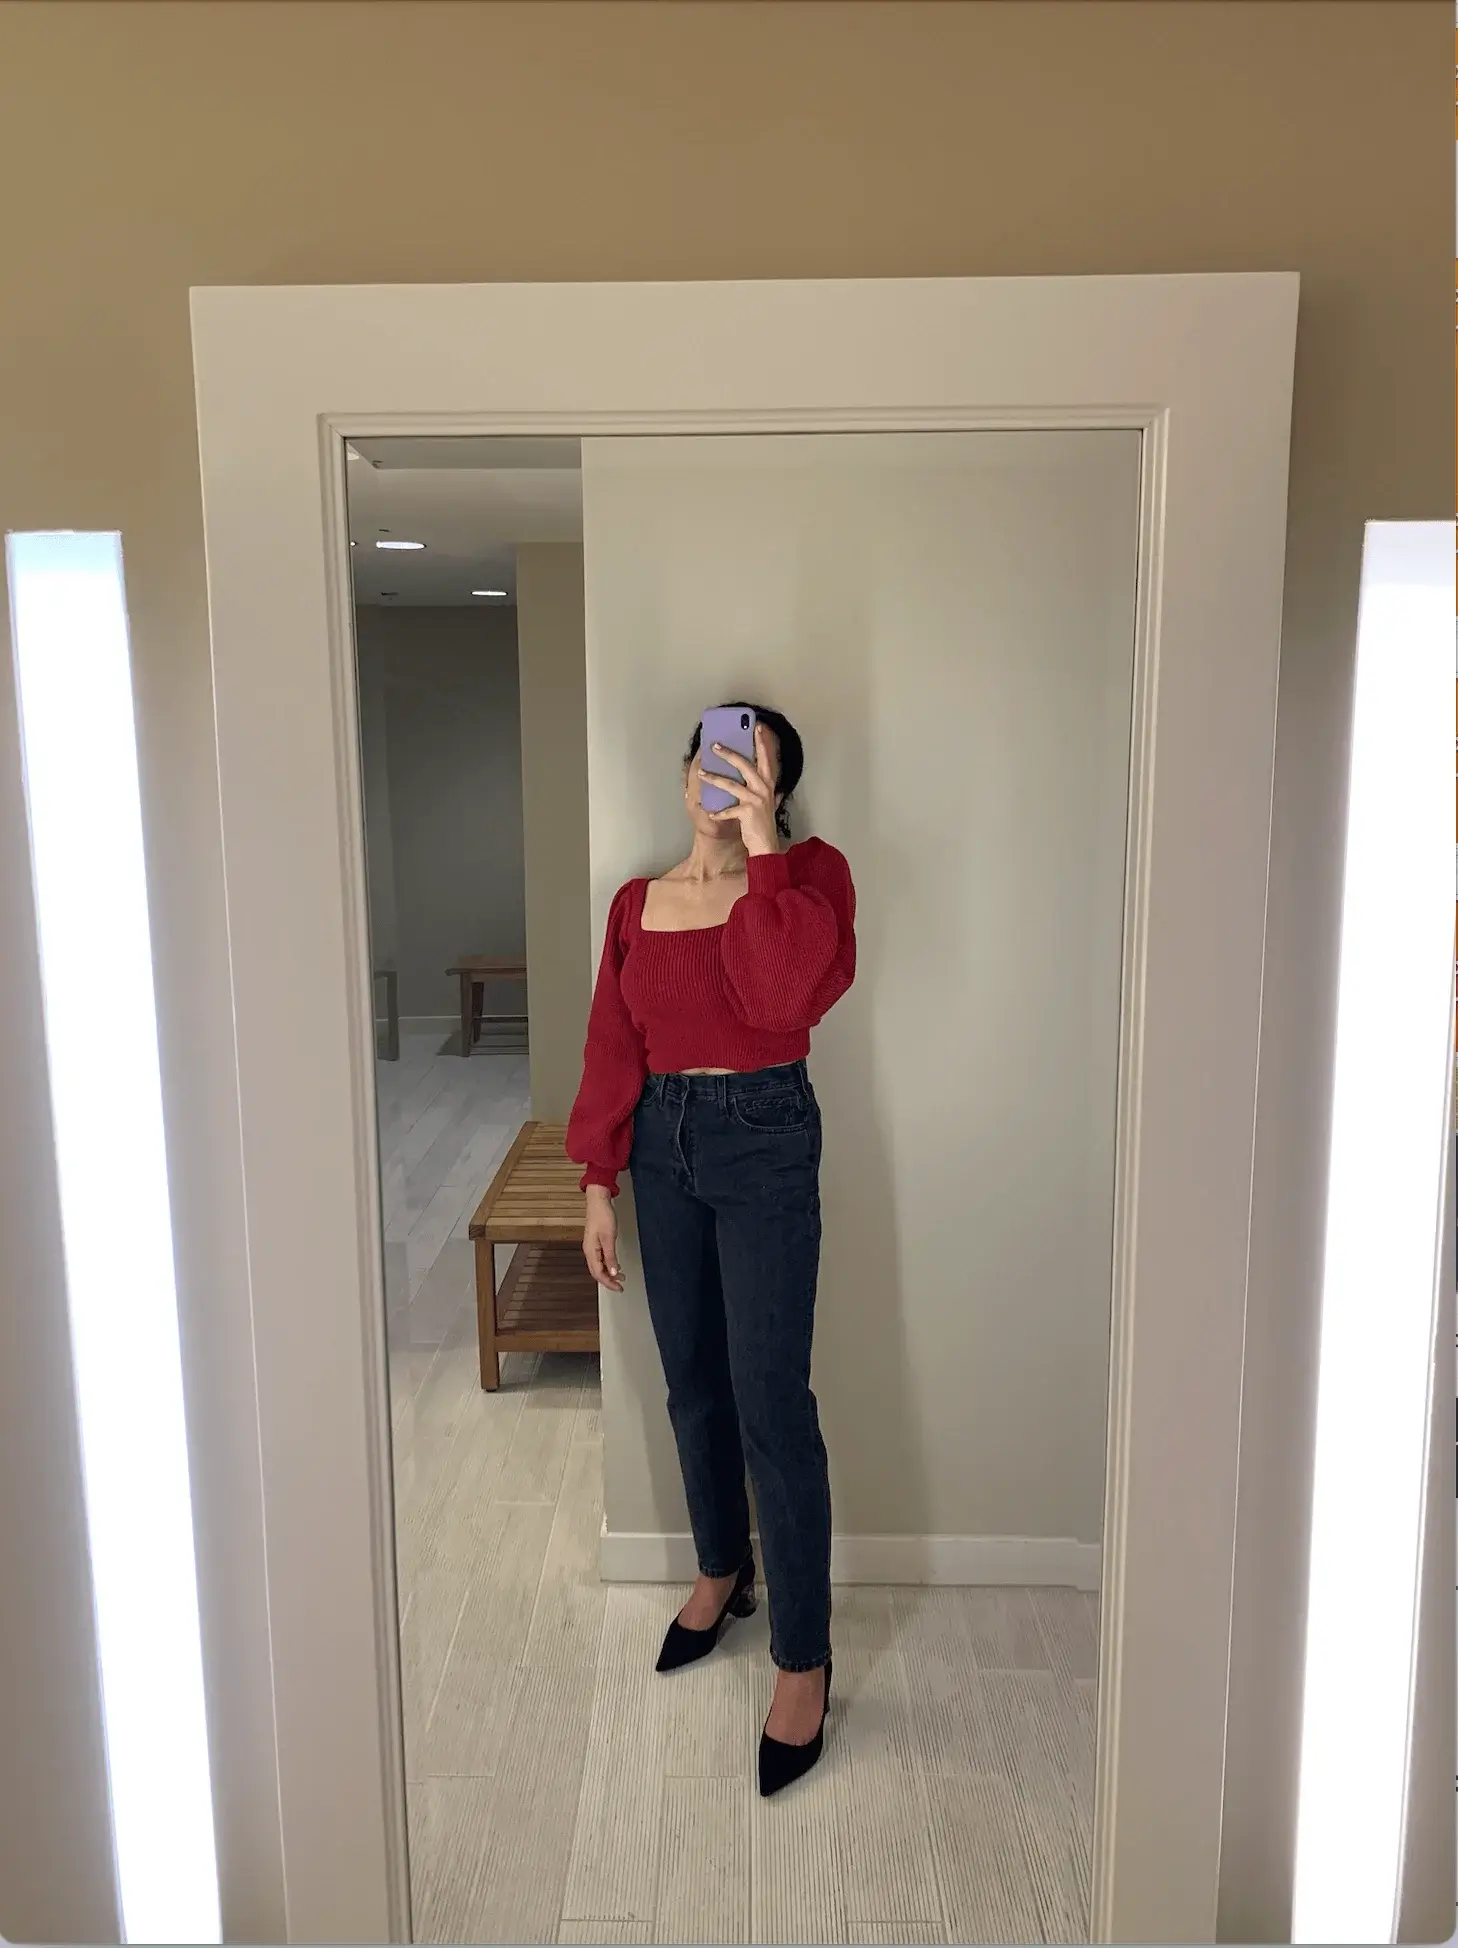 winter brunch outfit idea with jeans and sweater